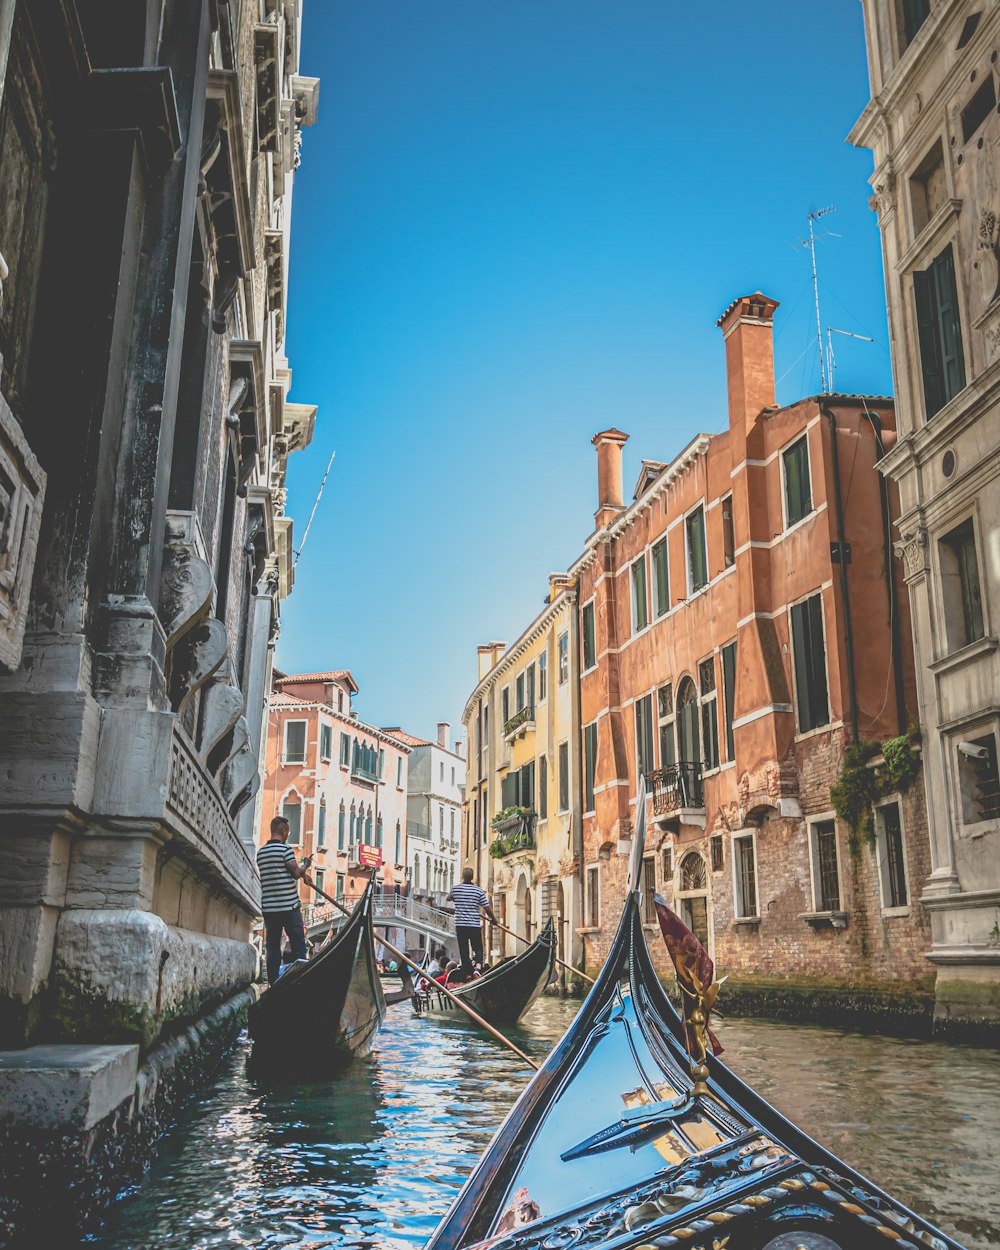 gondola boats in a canal in Venice, Italy